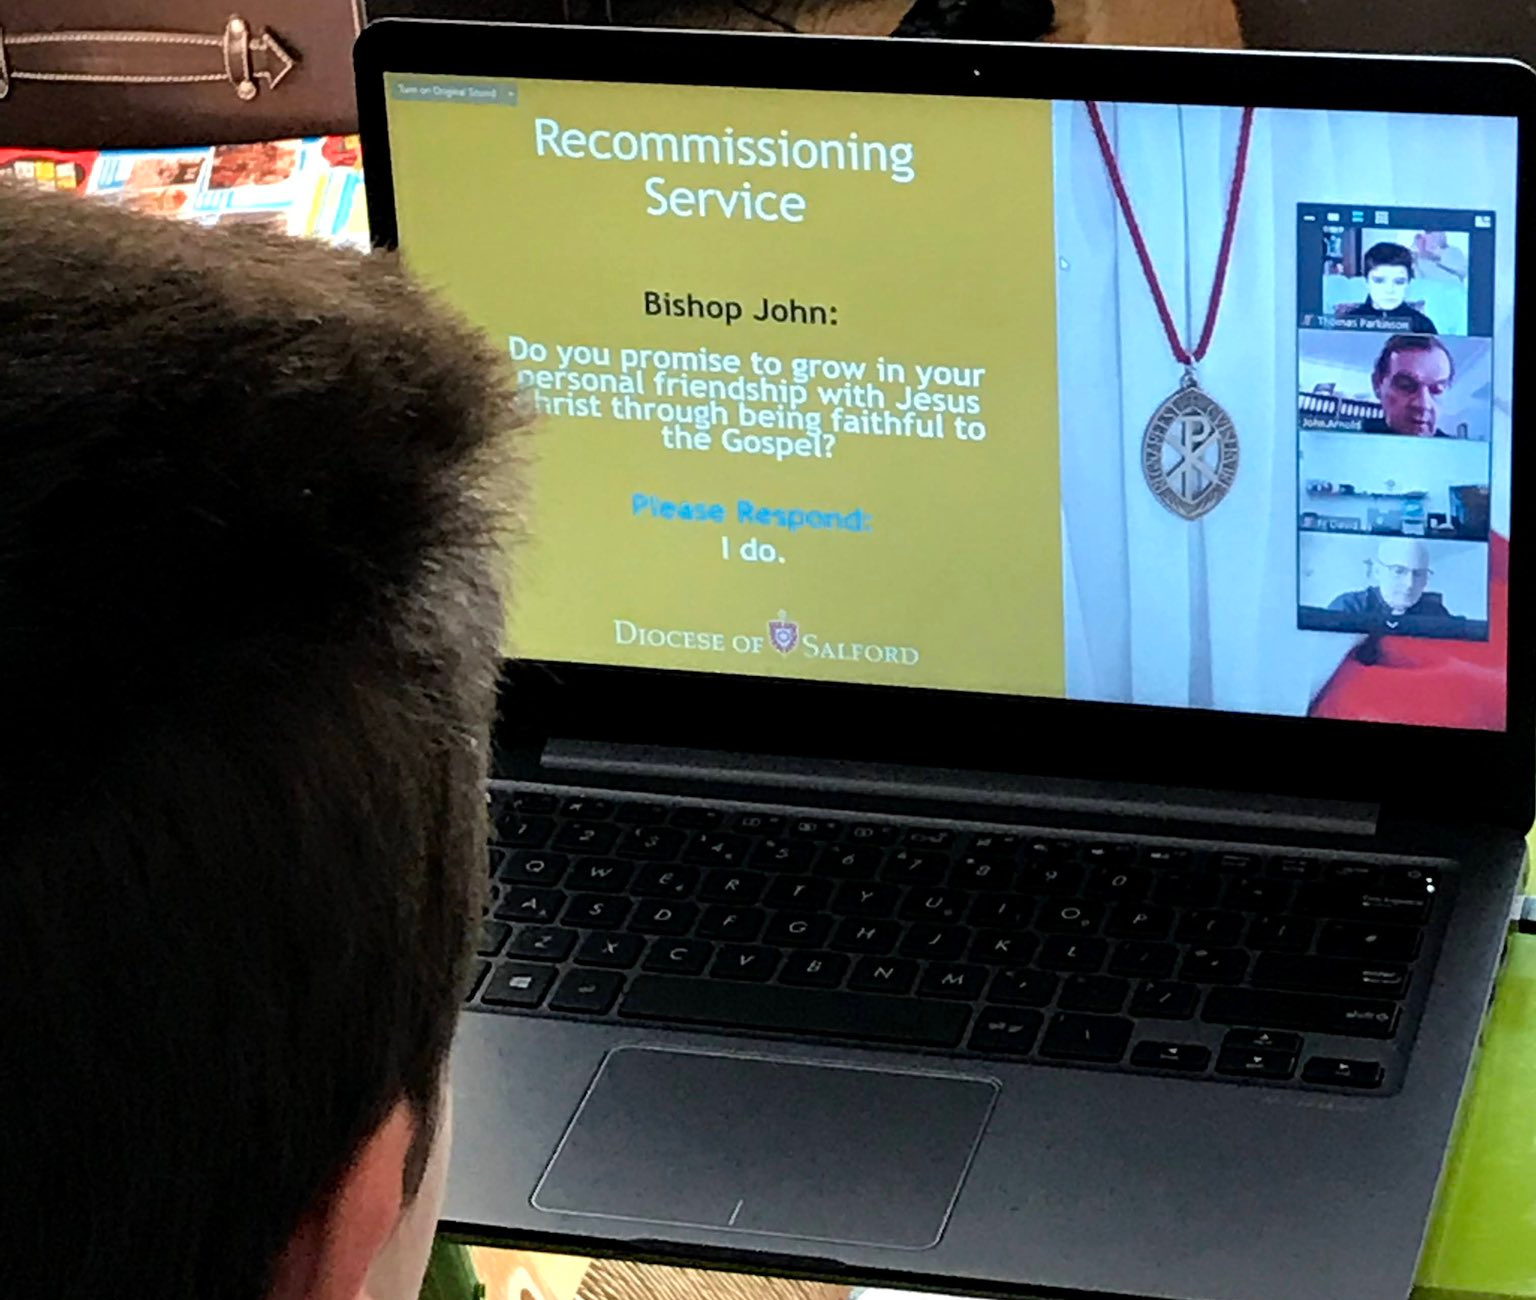 Thornleigh altar servers recommissioned in online service